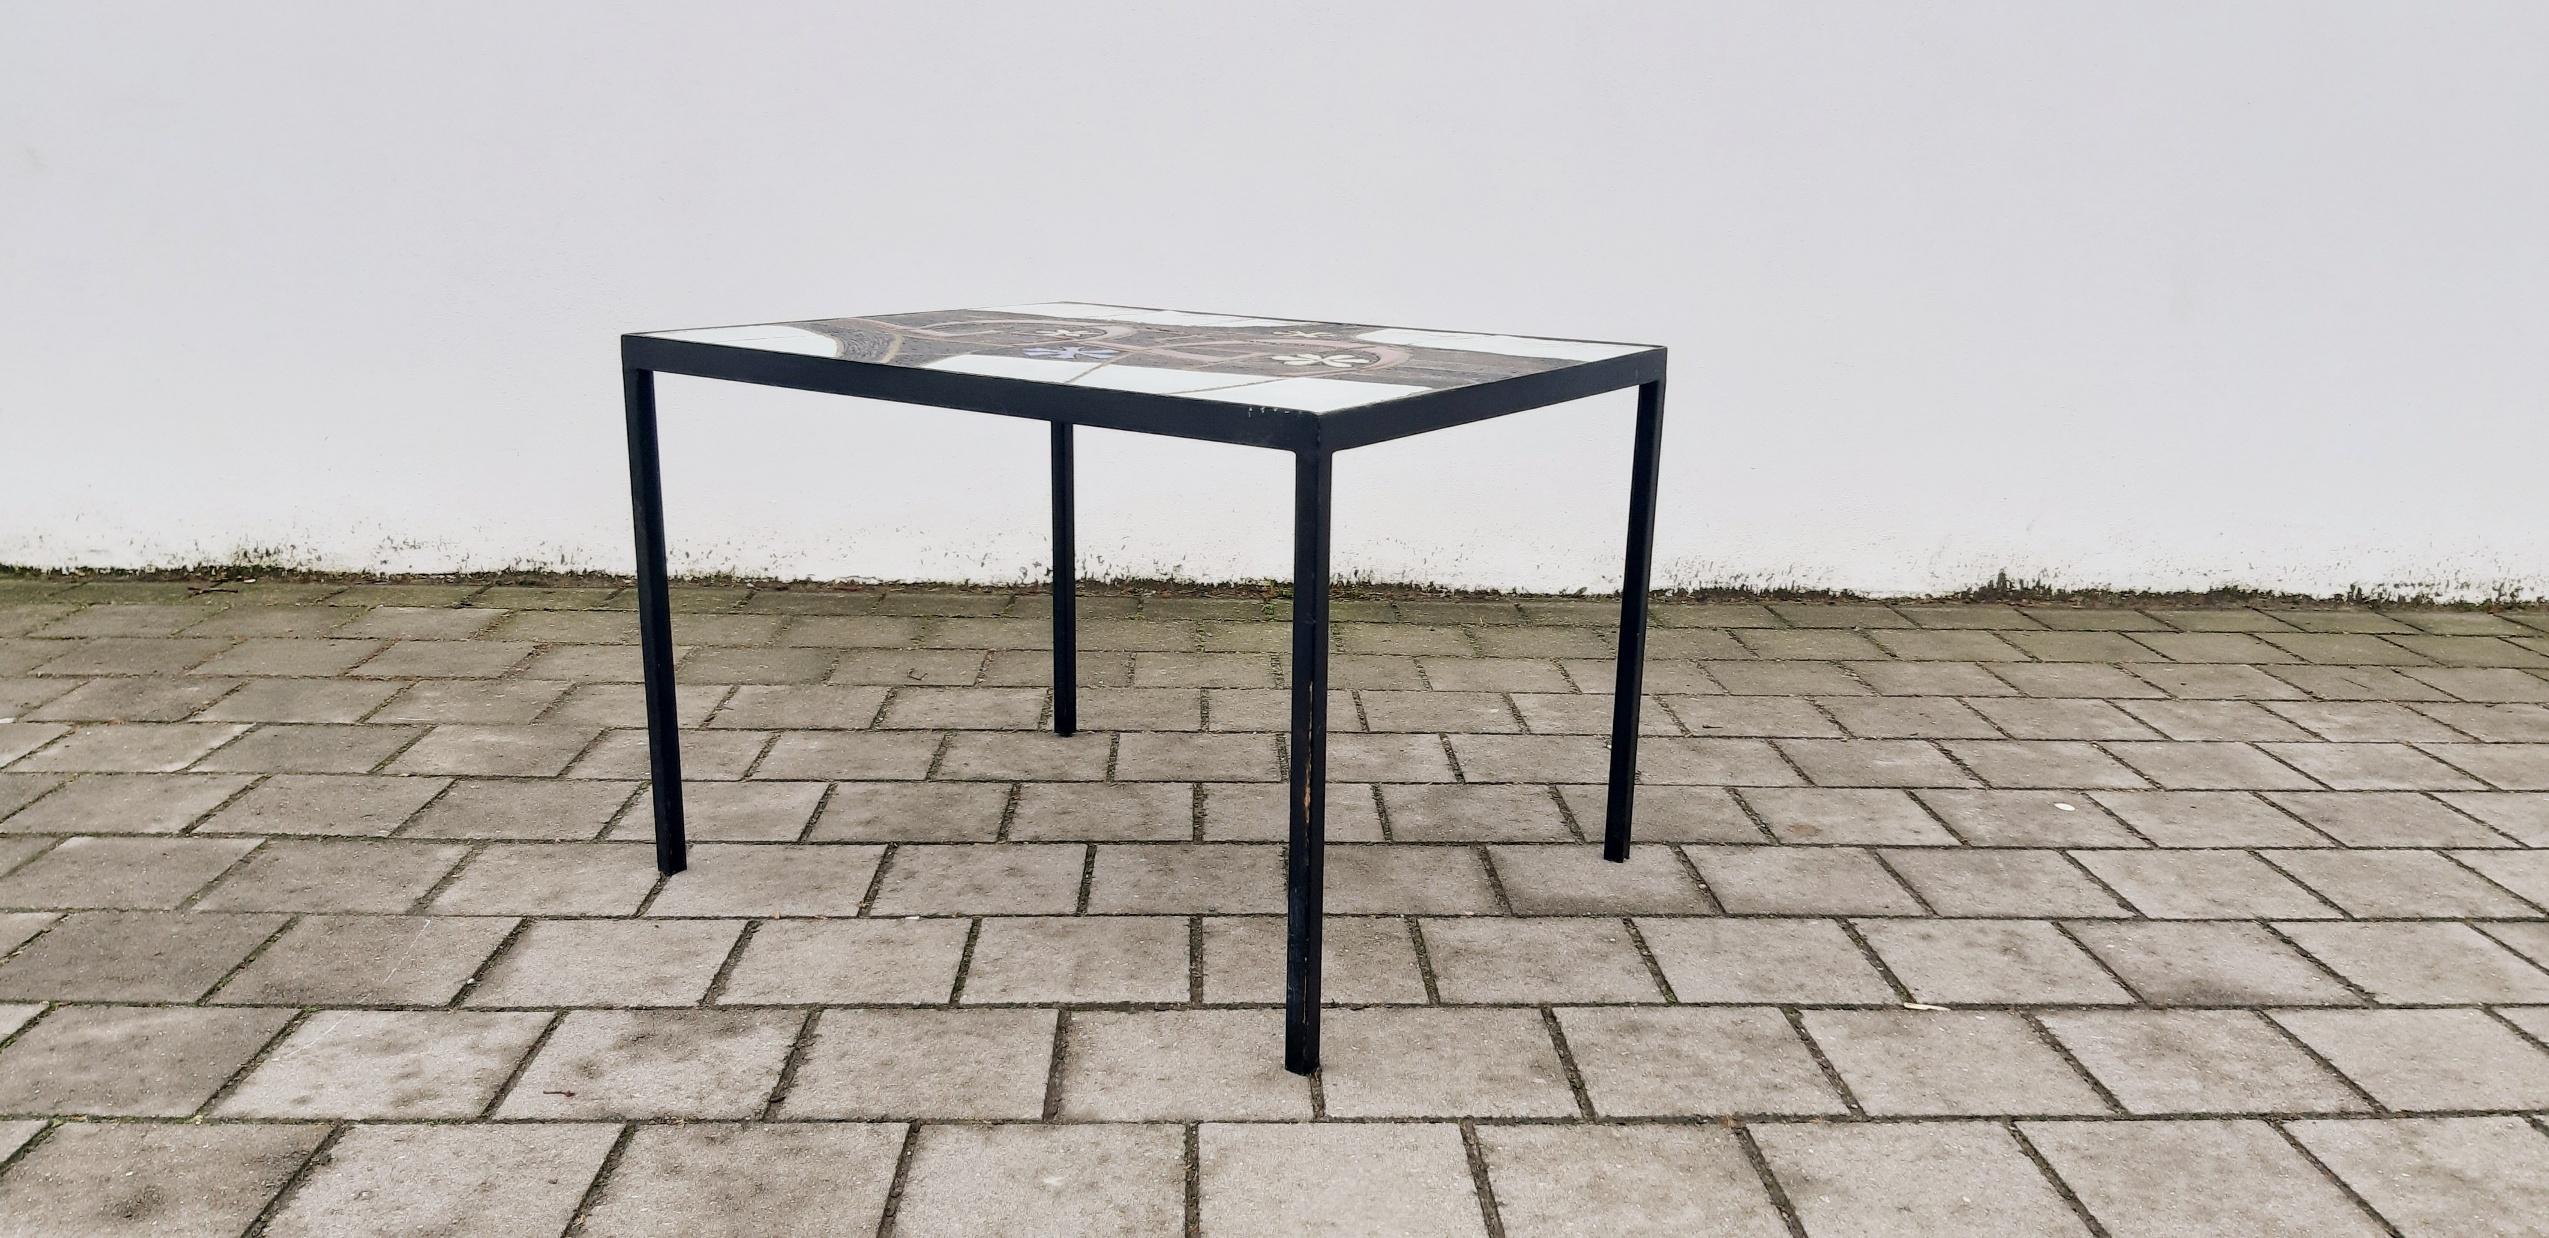 Rare midcentury coffee table dating from the 1960s, from belgian ceramist Paul Vermeire and produced by Perignem.